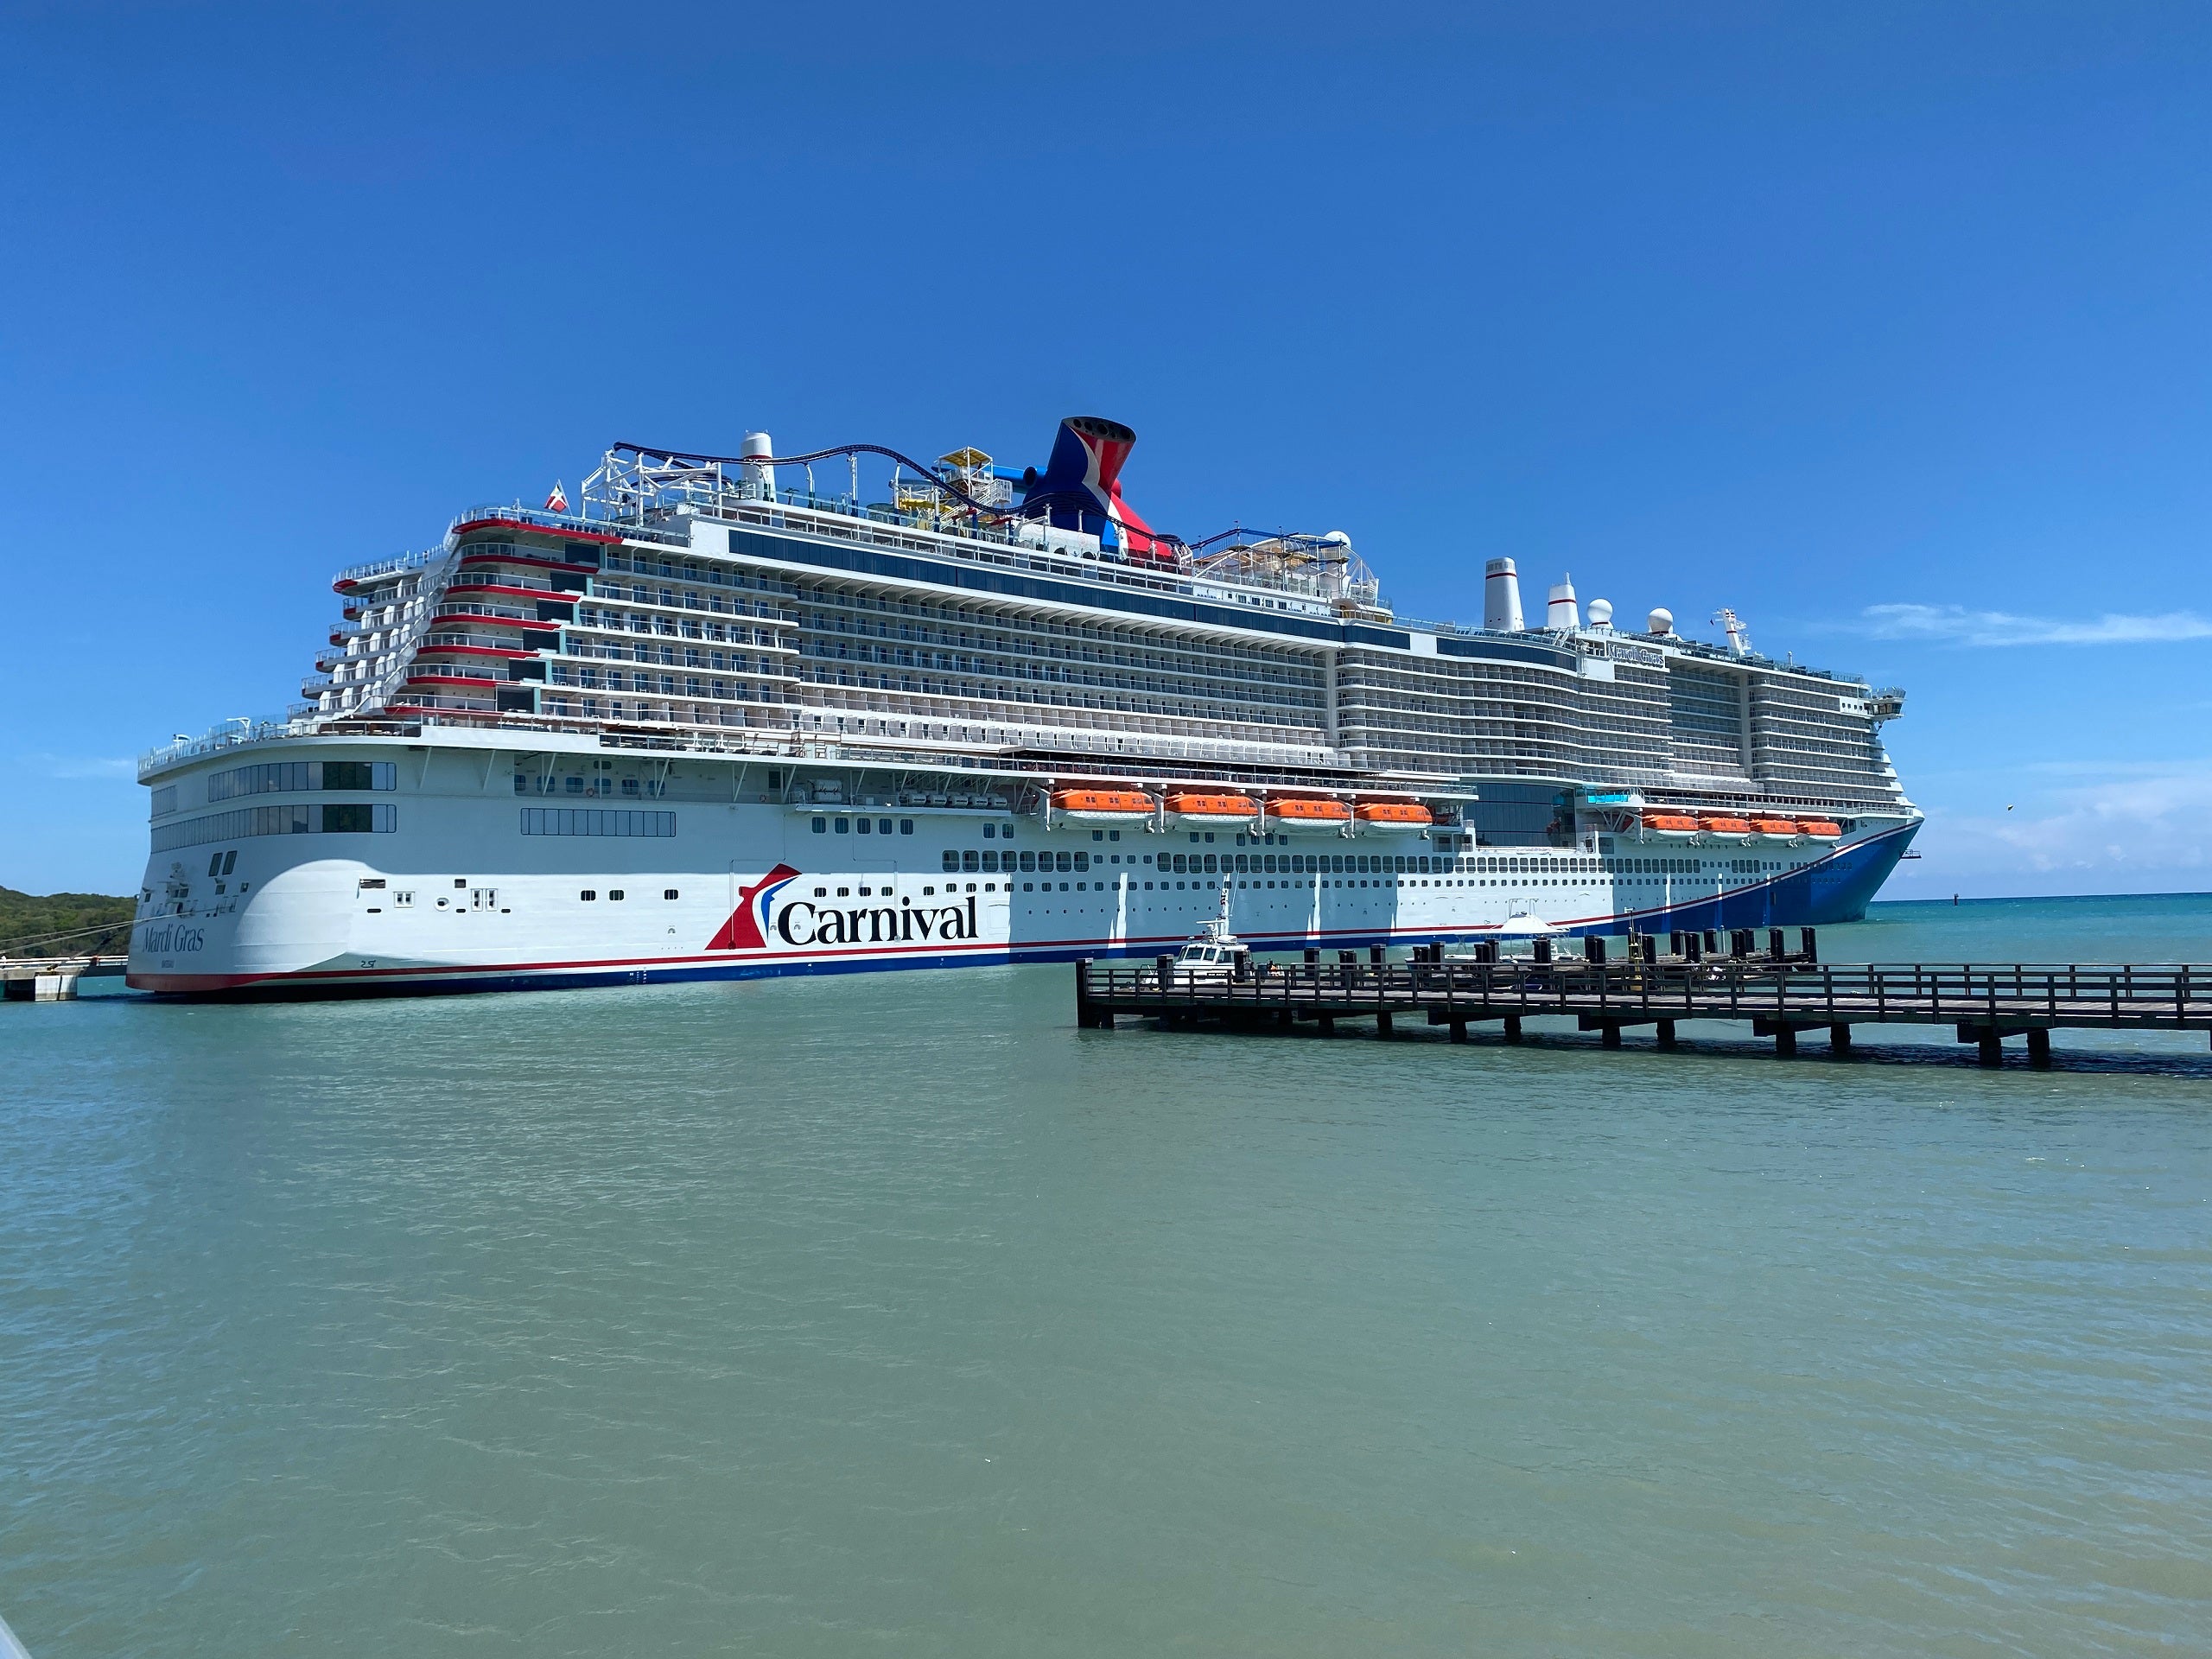 Best Carnival cruise ships Here’s which ship you should sail, based on